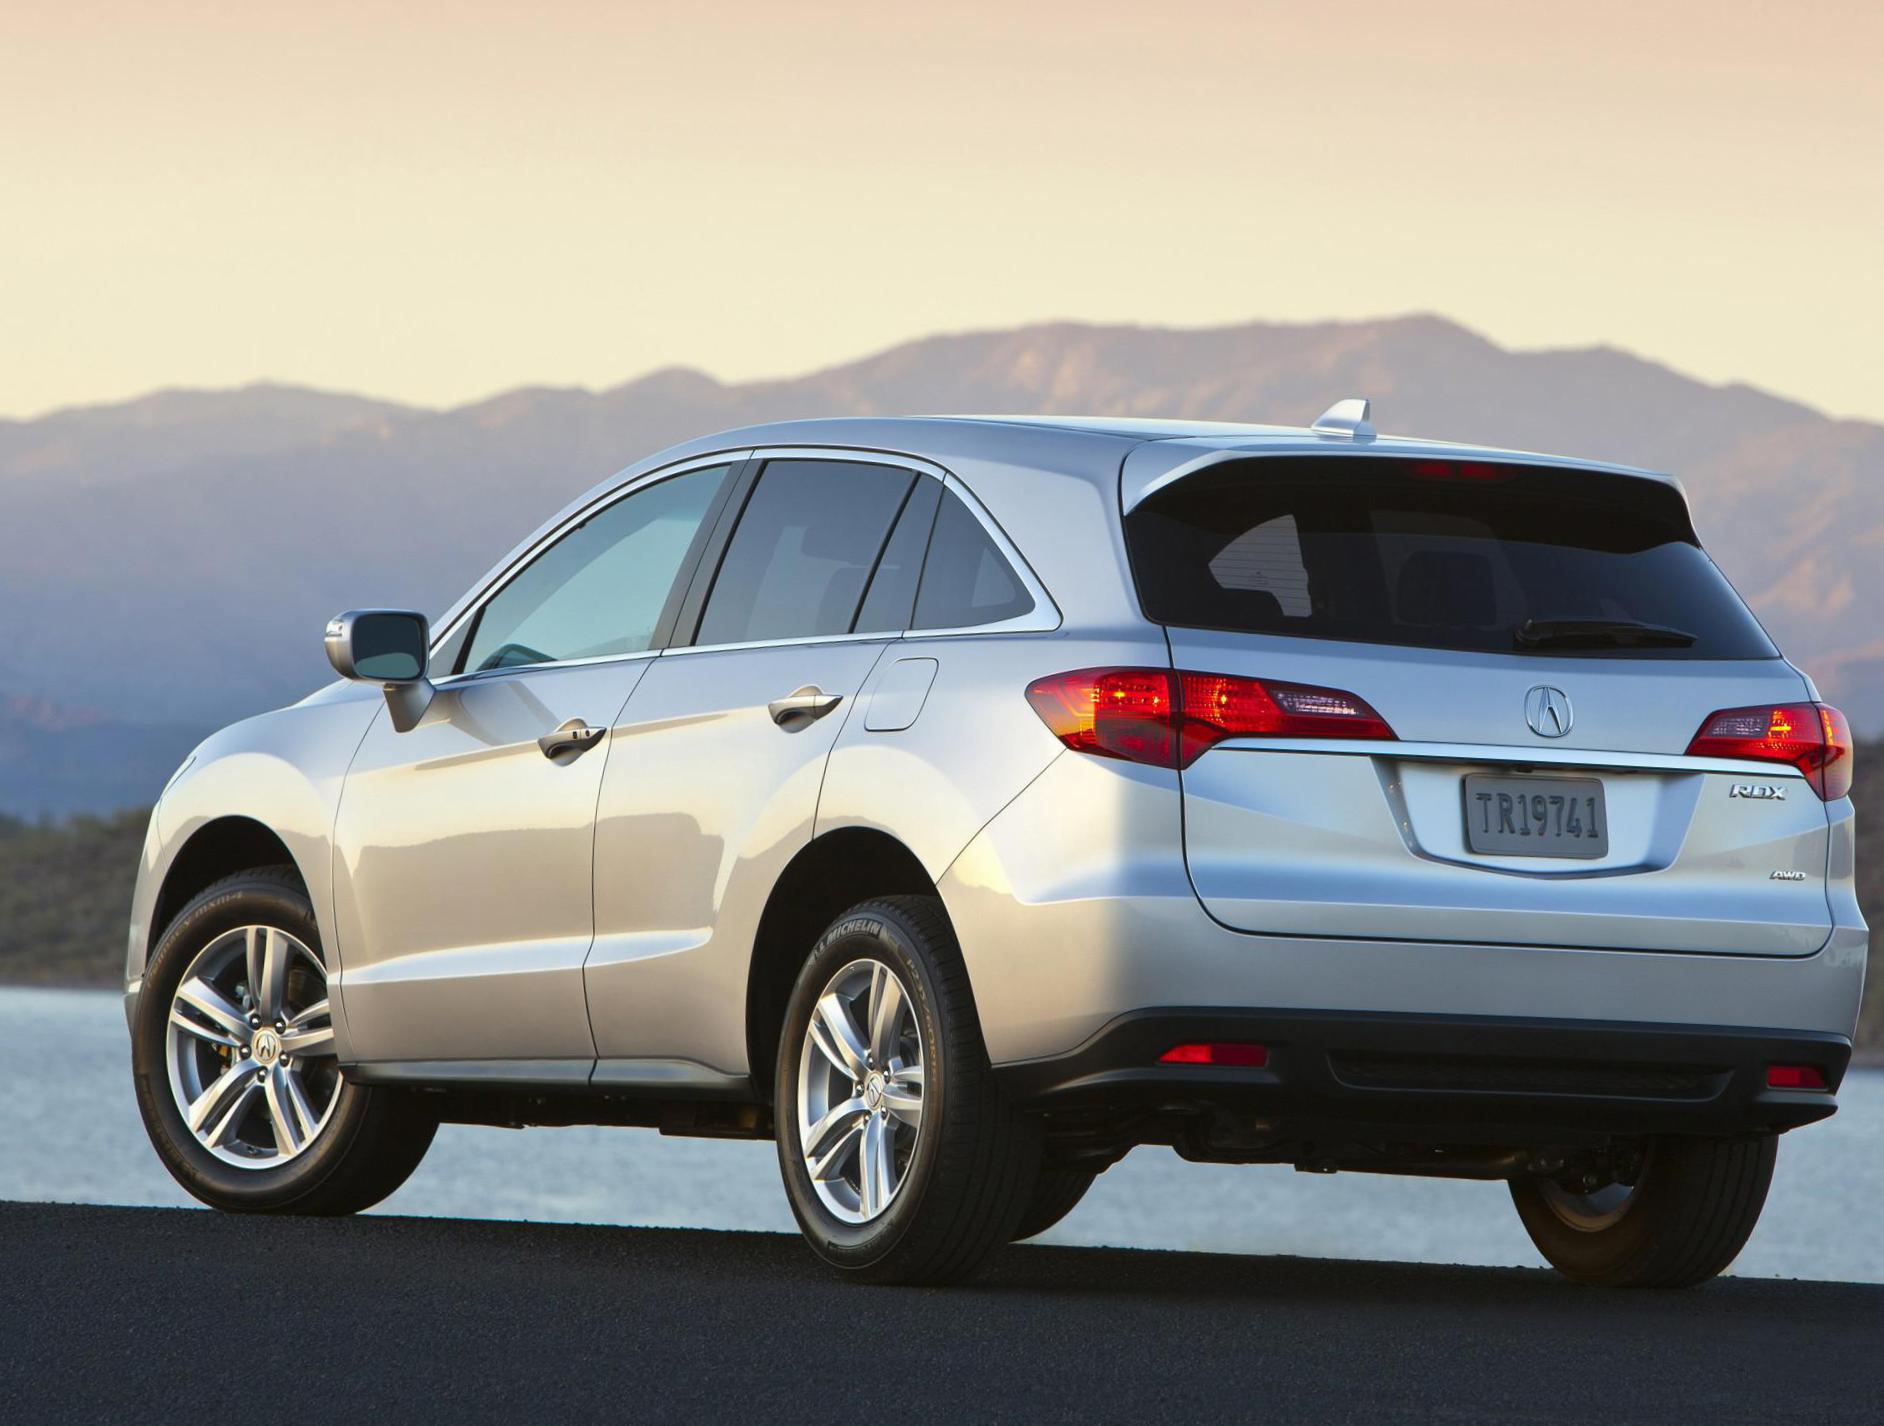 RDX Acura approved suv